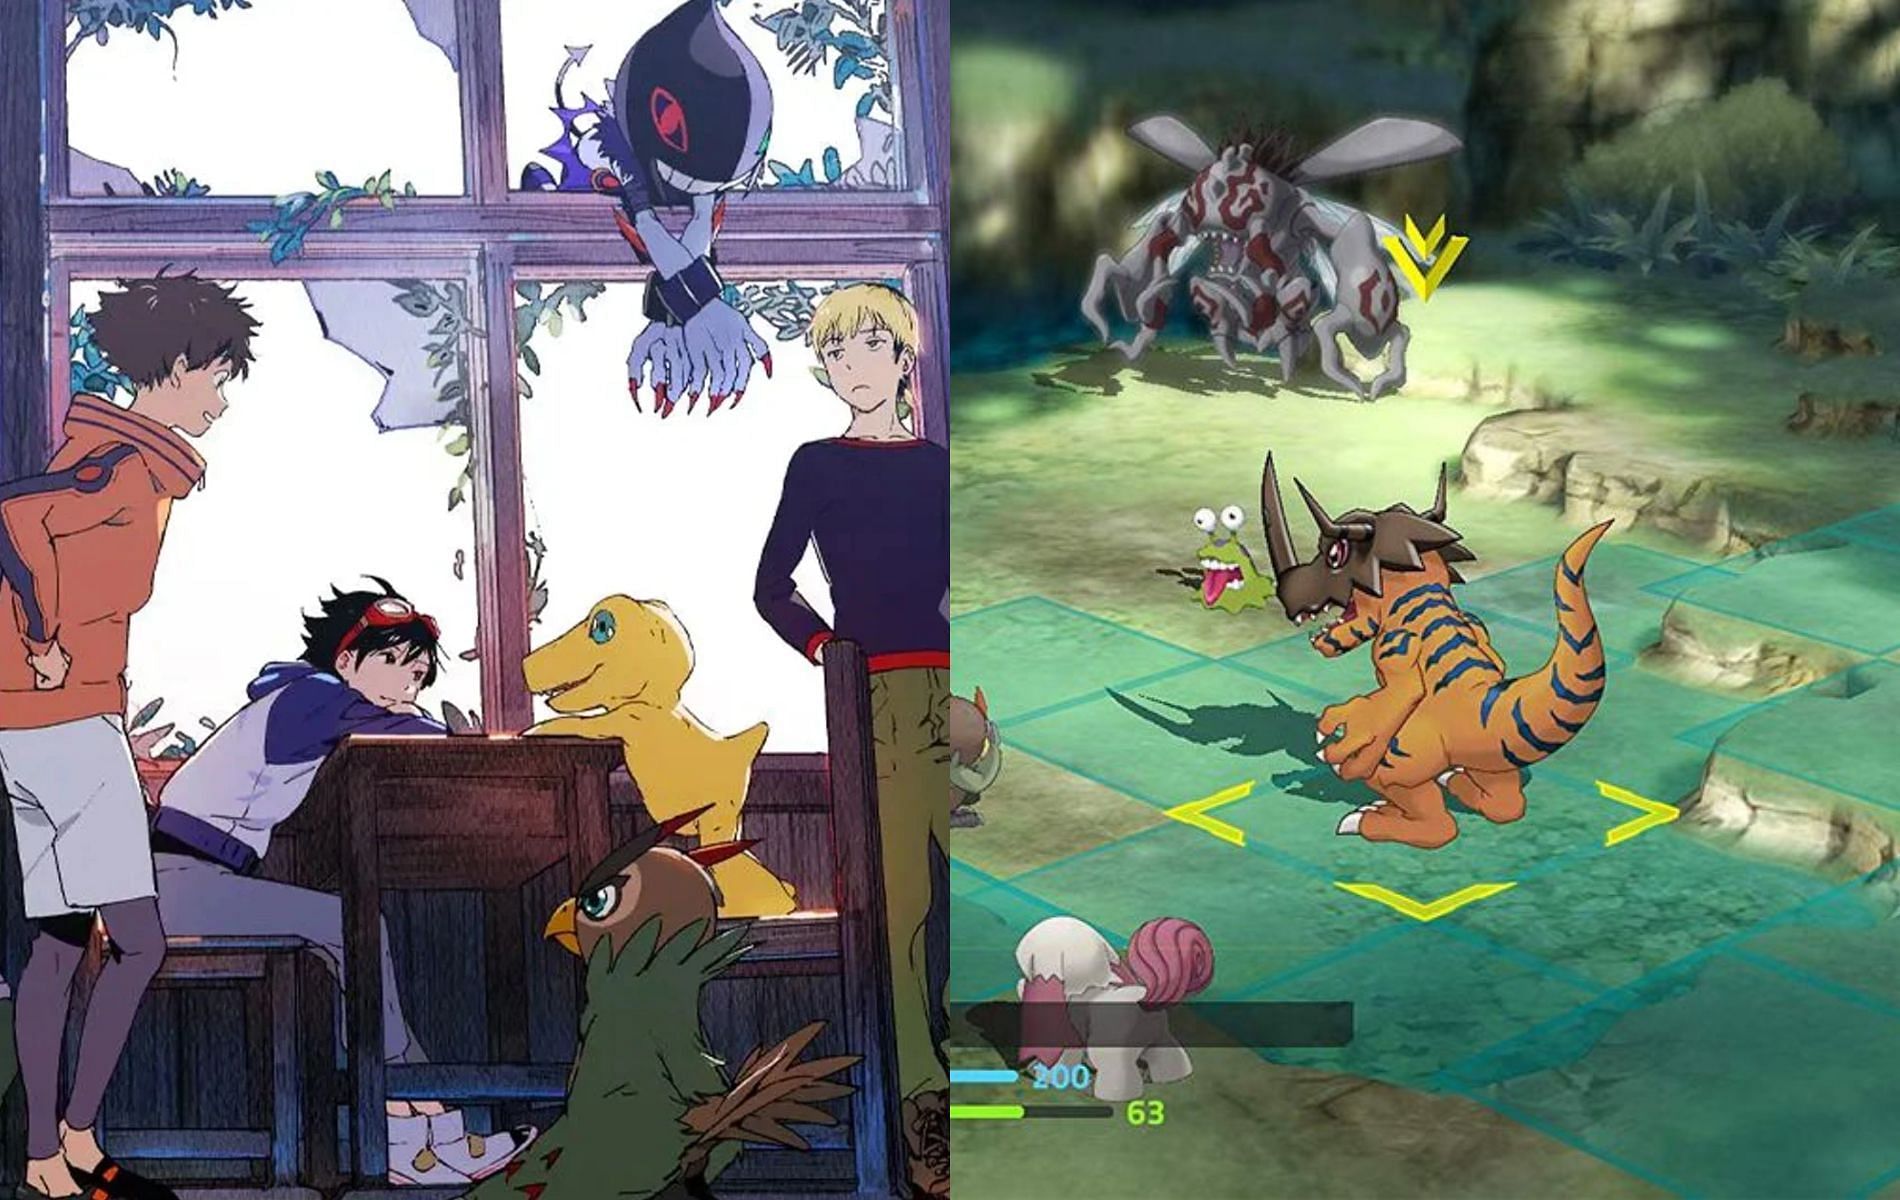 Unleash powerful attacks with your favorite Digivolutions in Digimon Survive (Images via Bandai Namco)